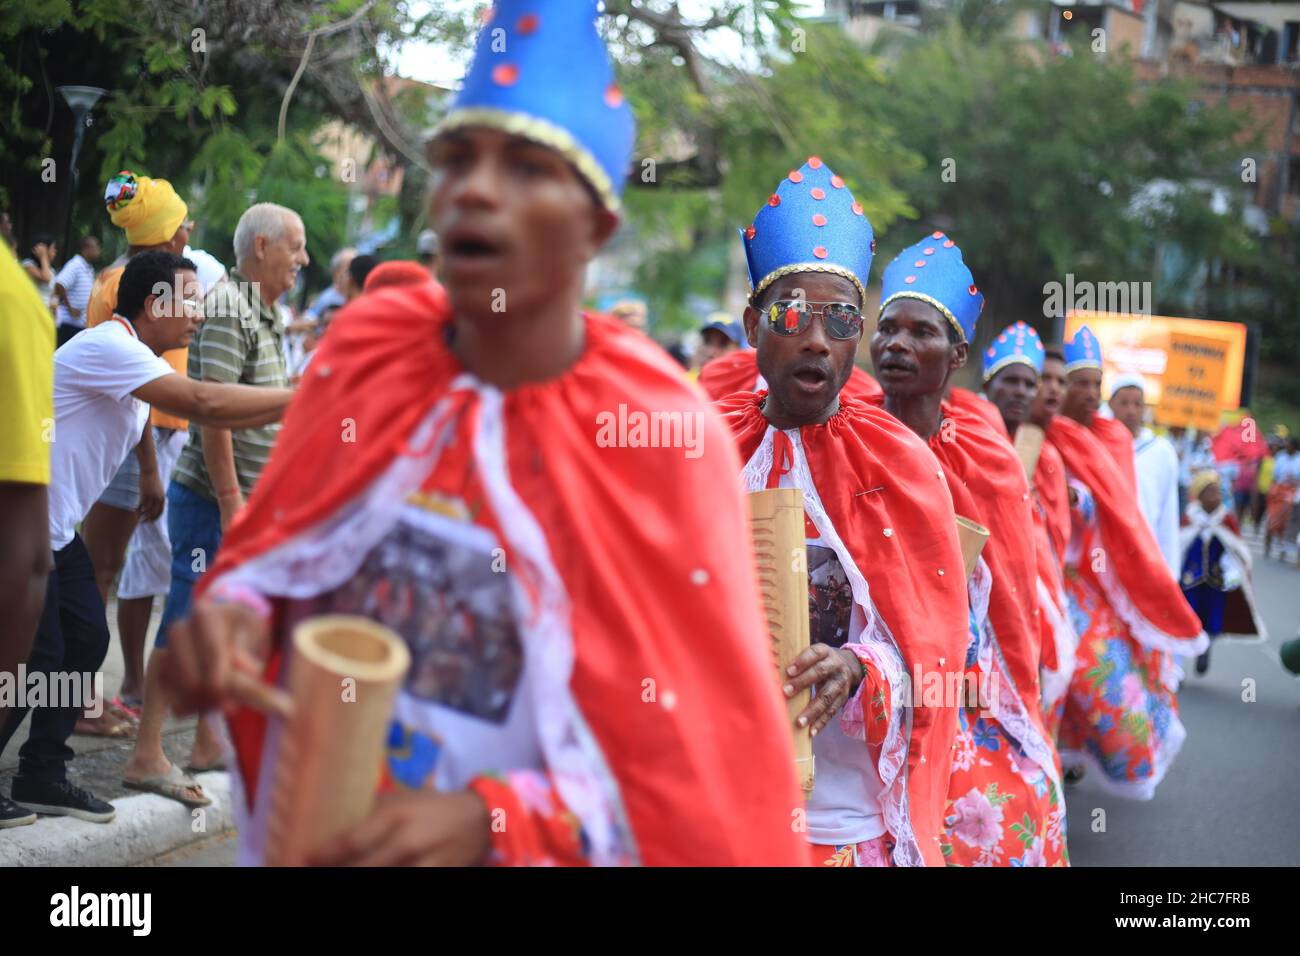 salvador, bahia, brazil - january 24, 2016: Members of the Congo, Reinado and Cheganca cultural group from the city of Cairu are seen during a cultura Stock Photo